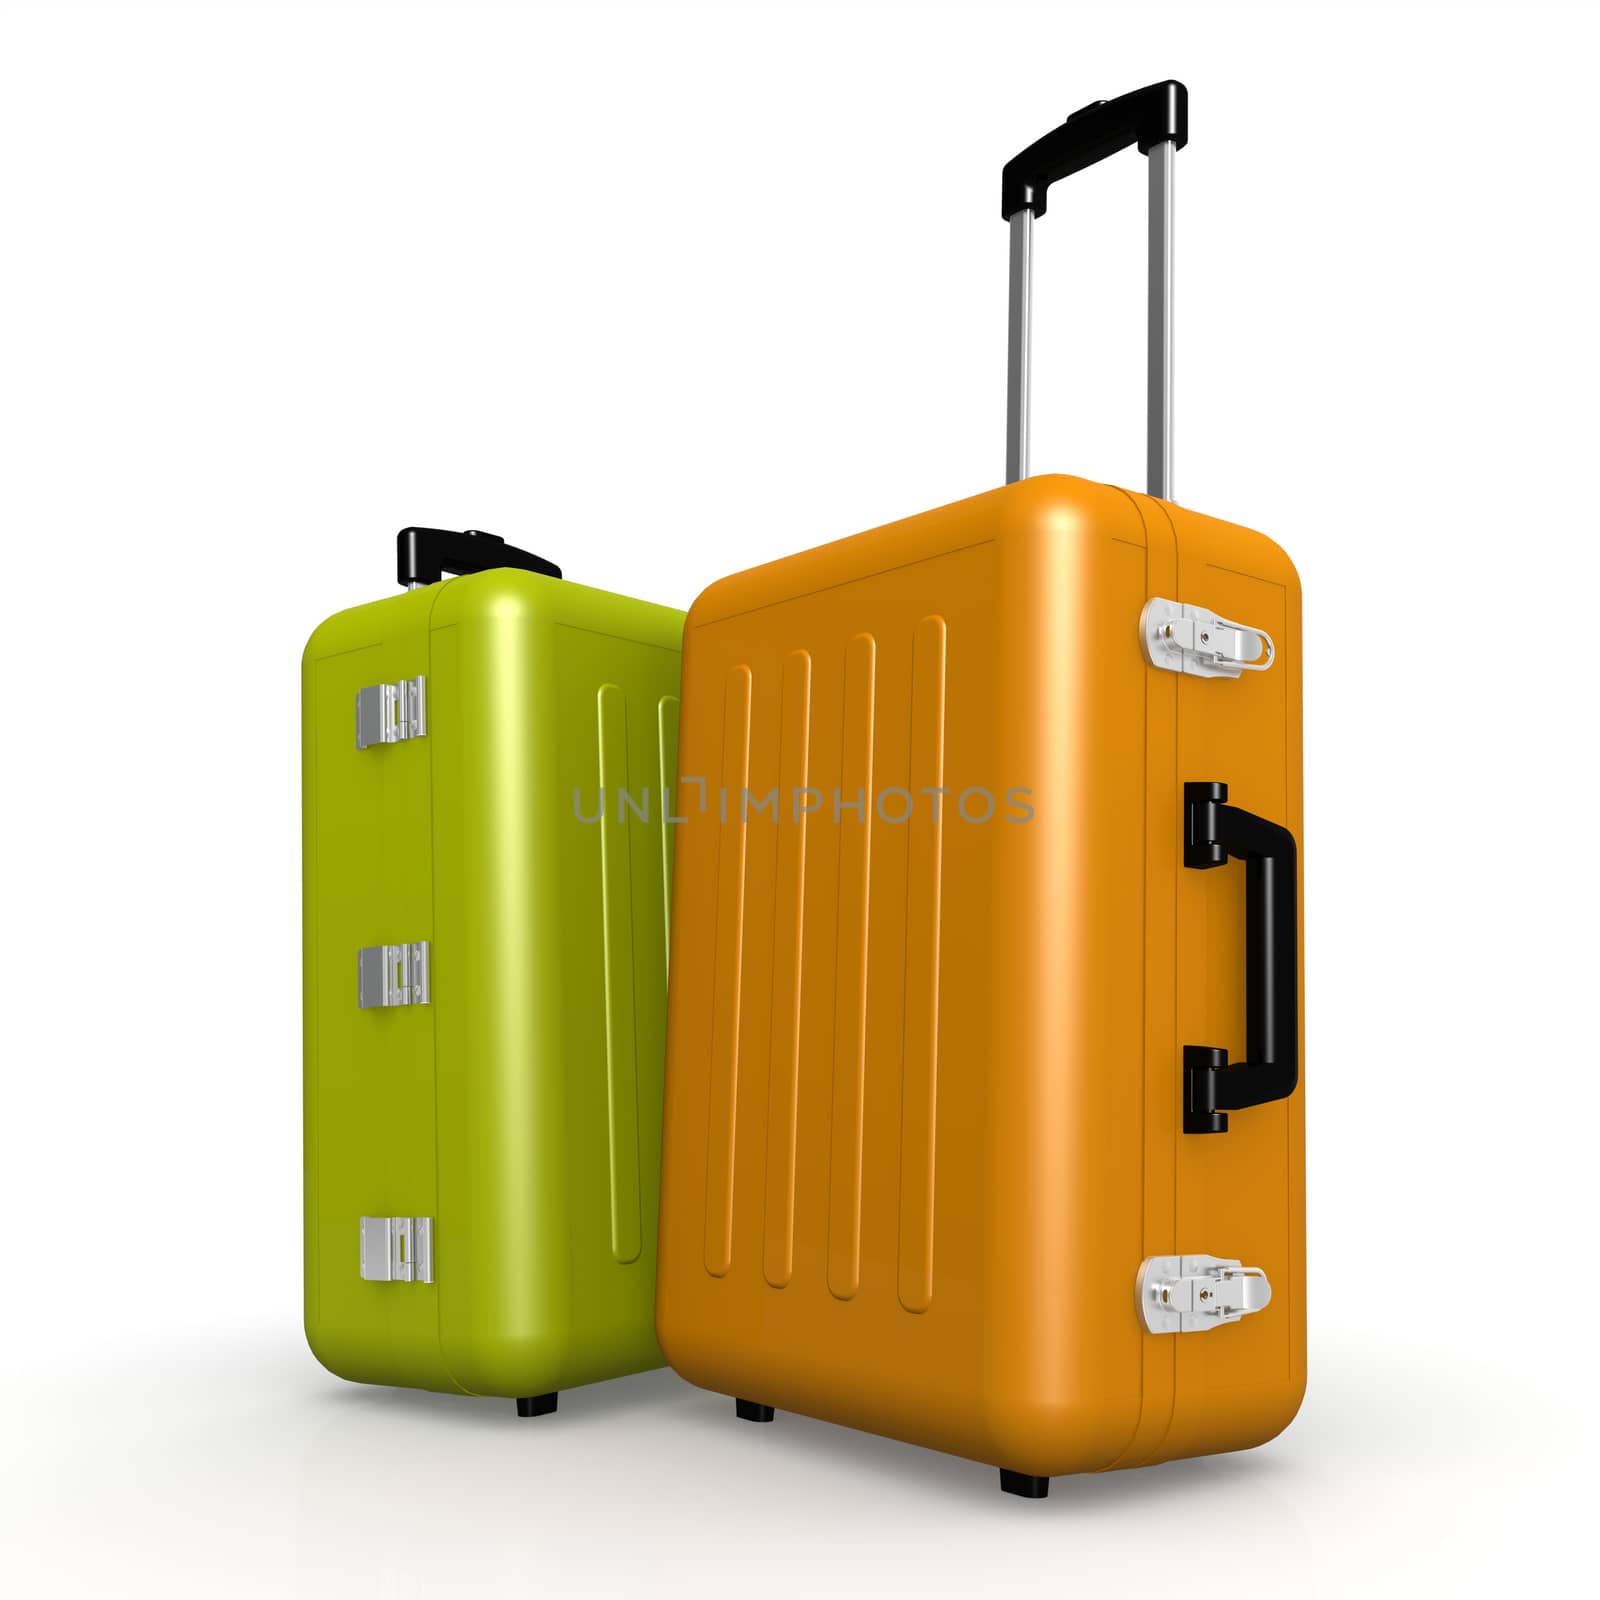 Orange and green luggages stand on the floor image with hi-res rendered artwork that could be used for any graphic design.